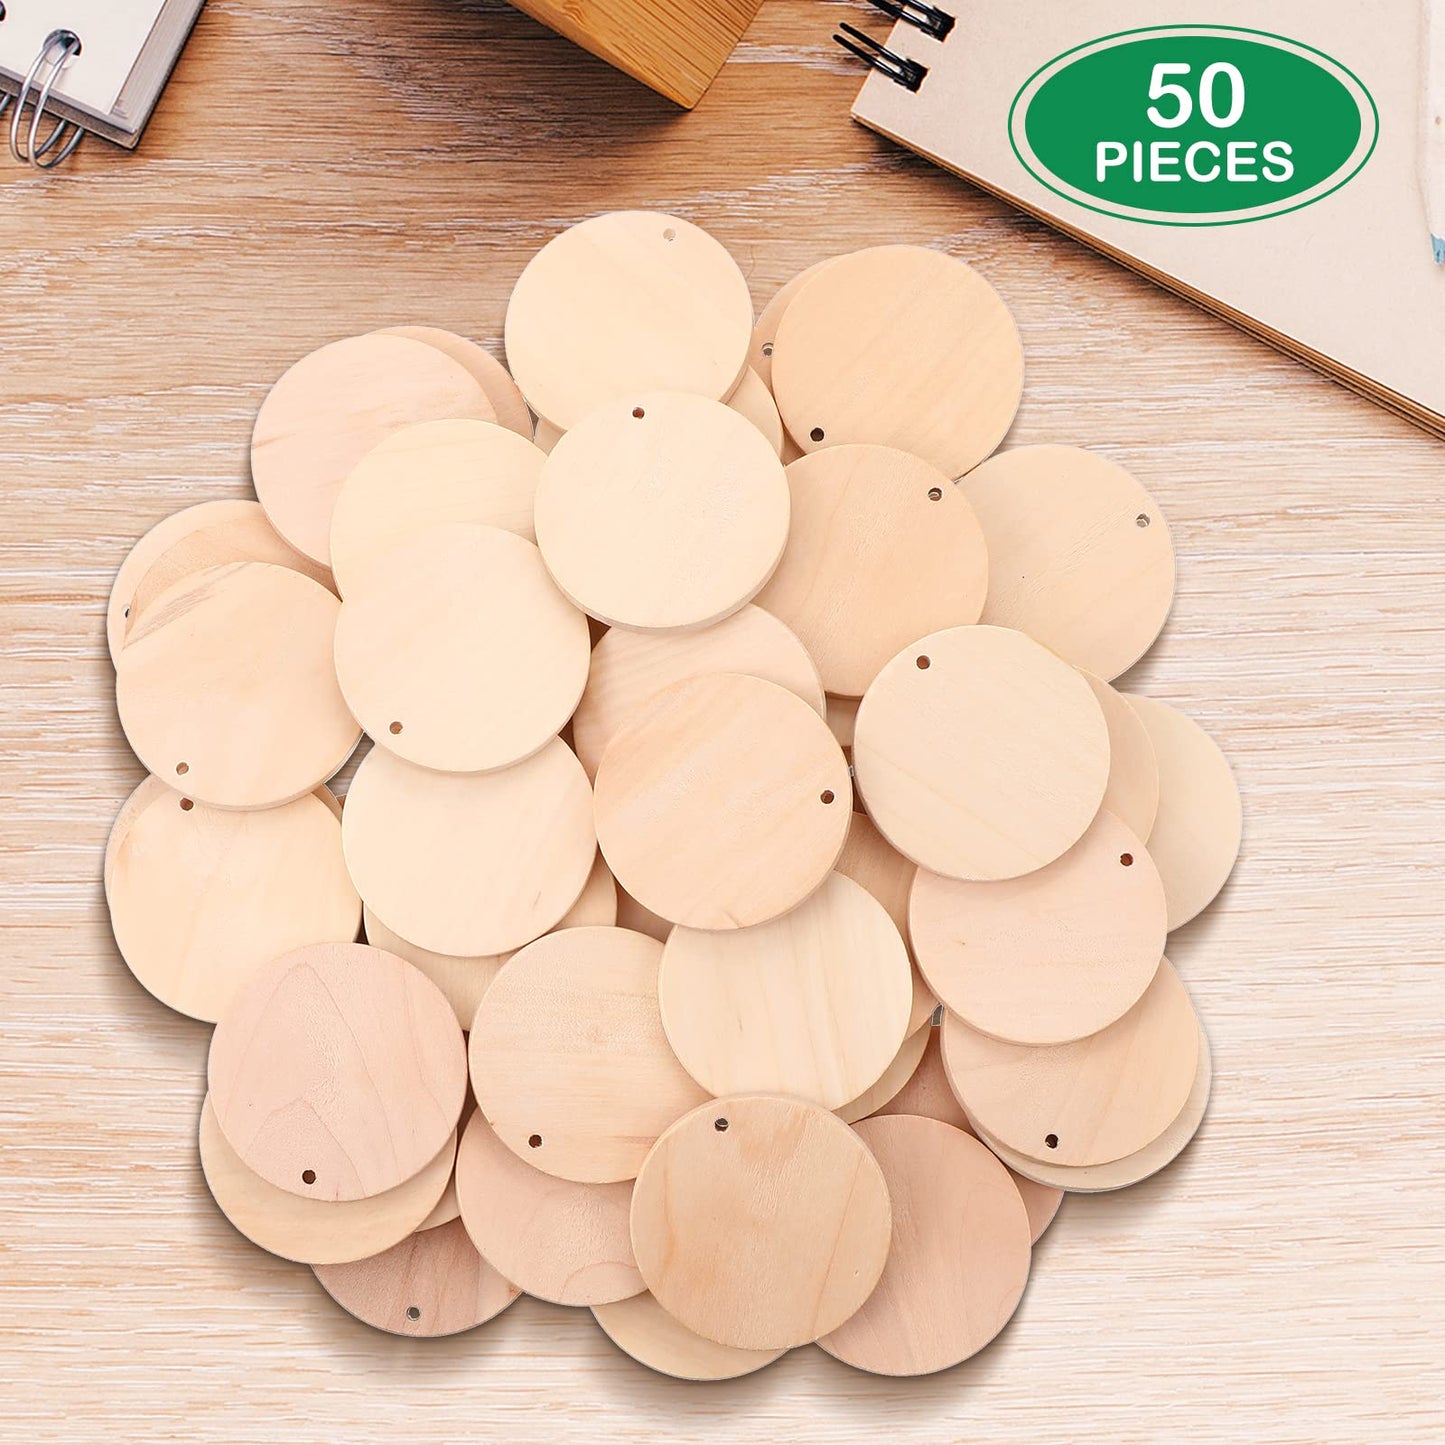 50 Pcs 2 Inch Wooden Circle Cutouts Blank Round Wood with Holes Round Wooden Ornaments Wooden Coins Unfinished Wood Round Disc Wooden Circle Chips